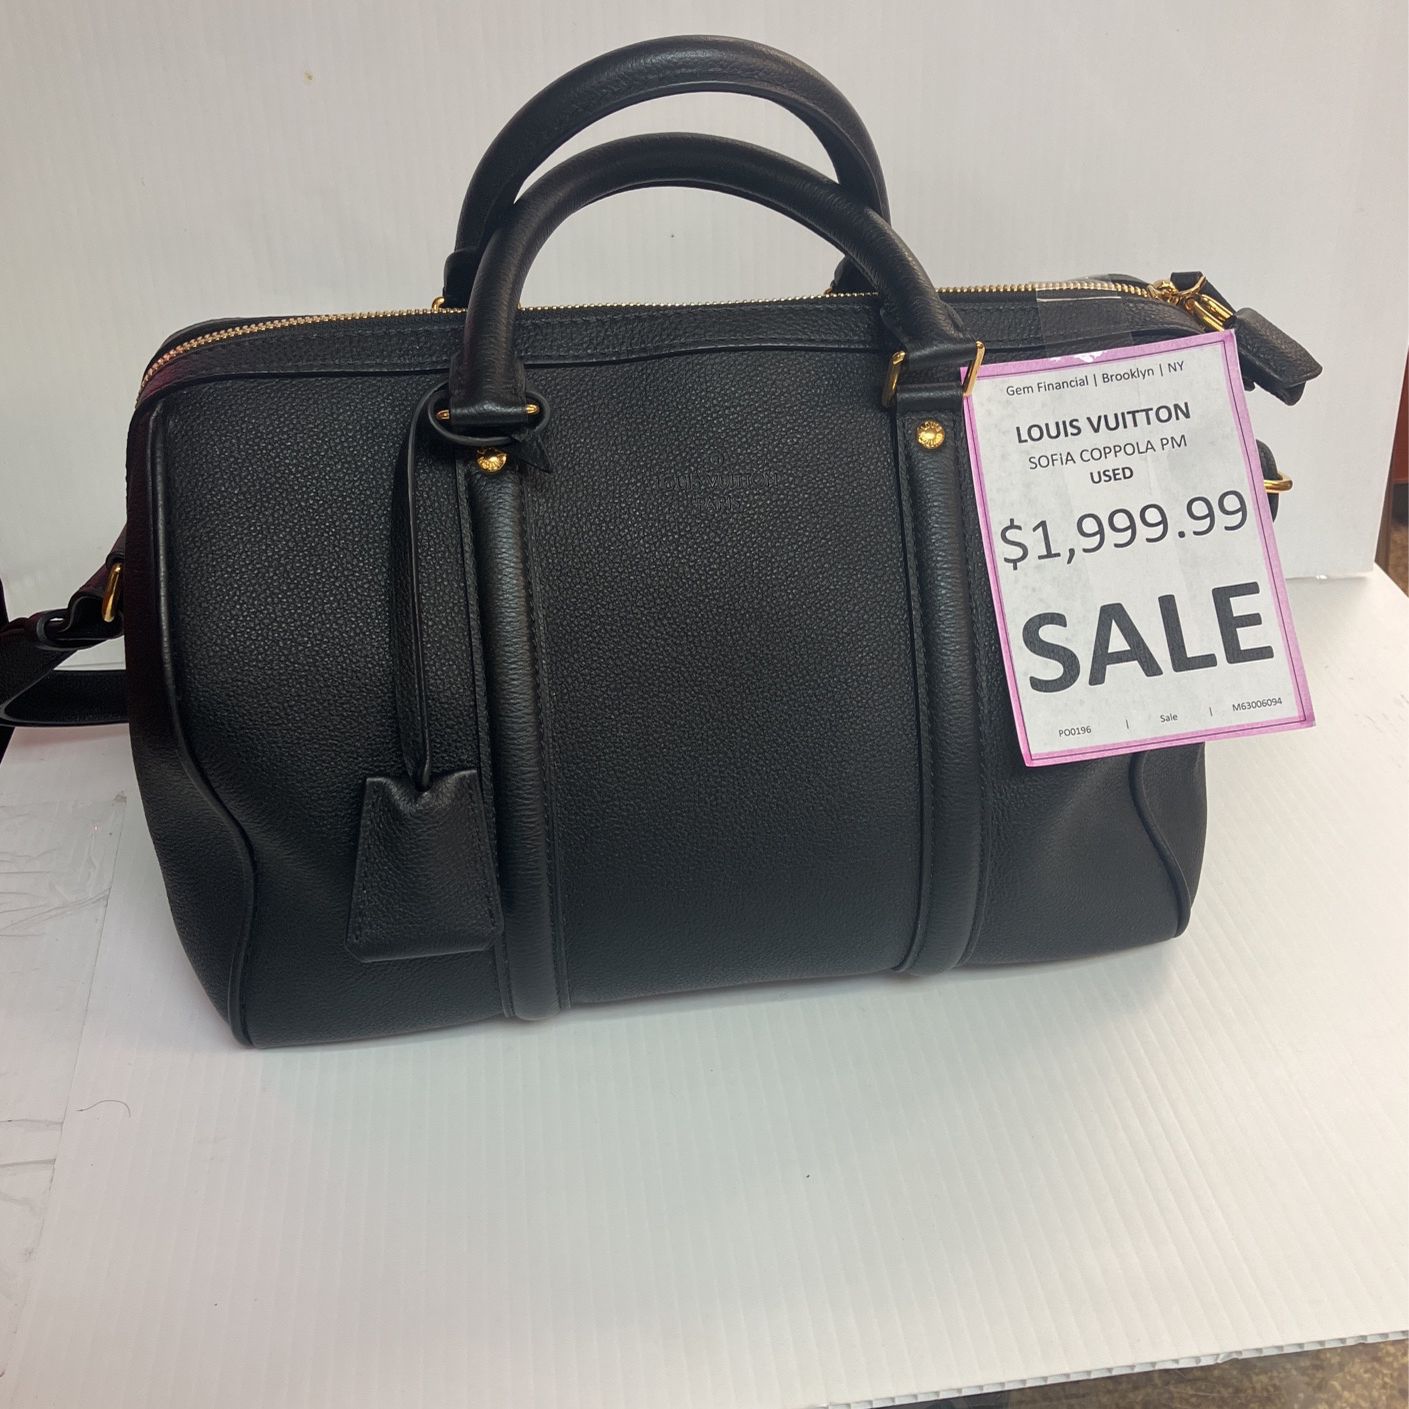 Louis Vuitton & Sofia Coppola Handbag for Sale in South Hempstead, NY -  OfferUp